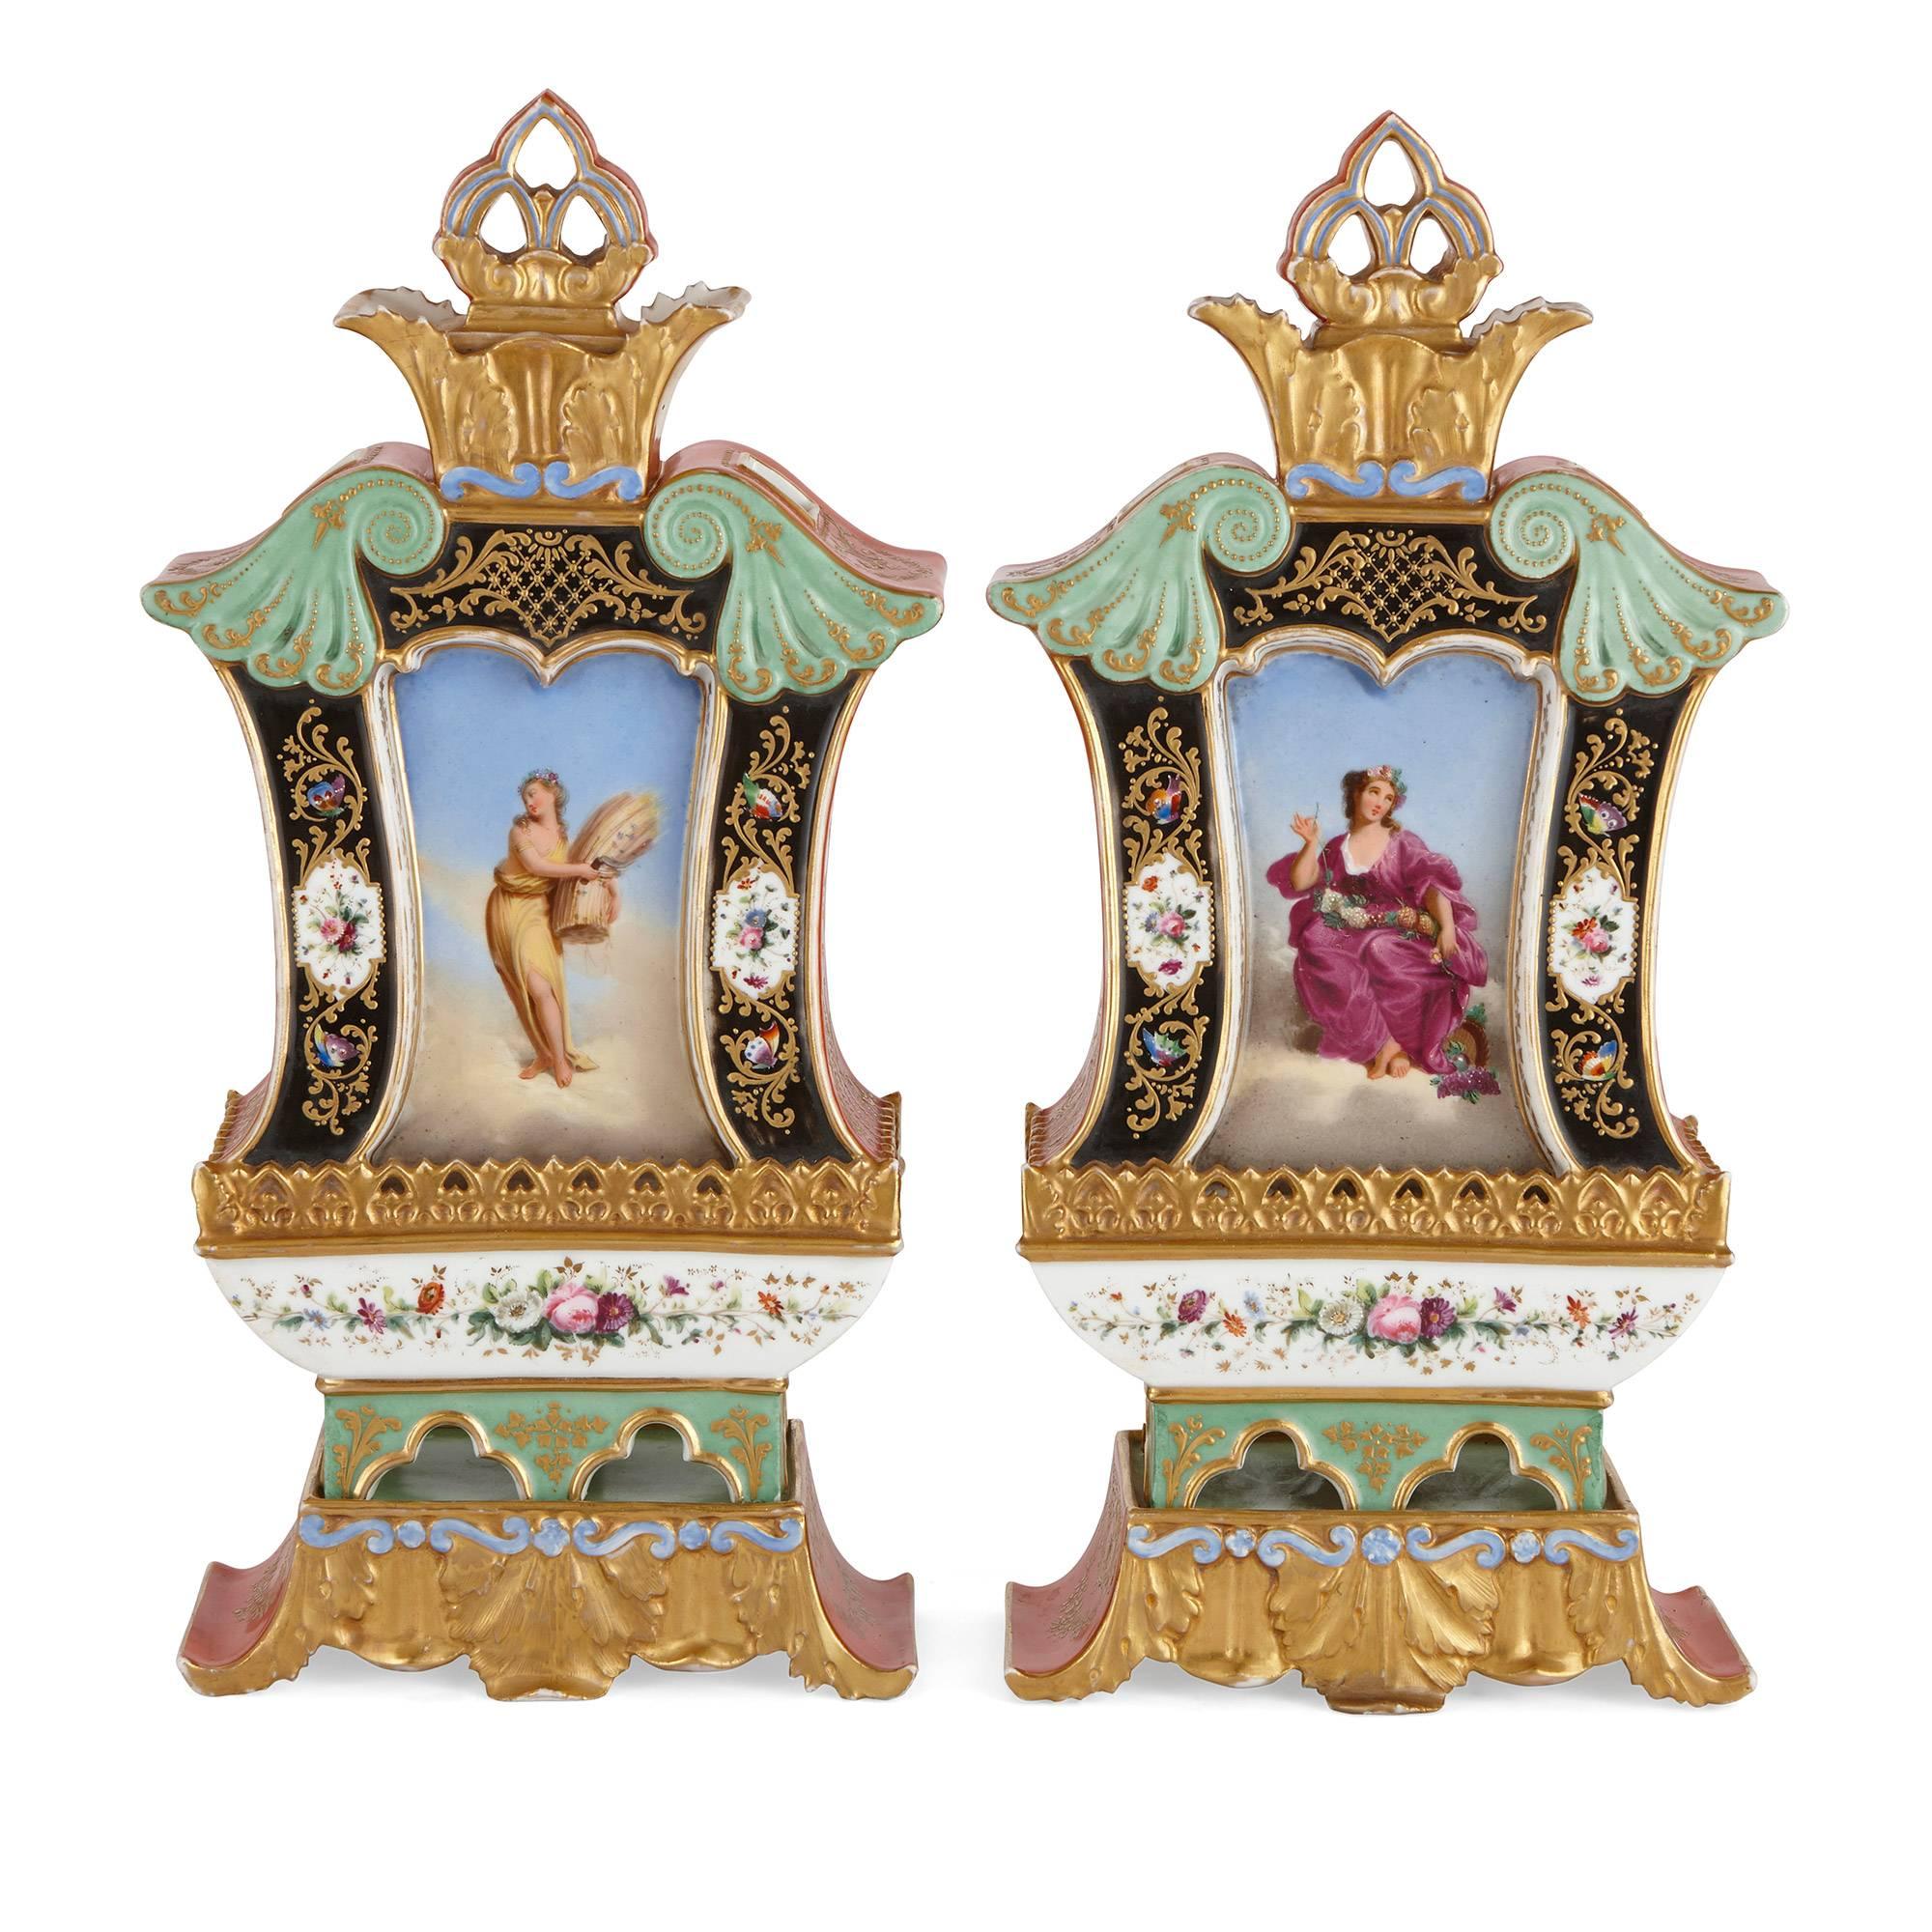 Each vase decorated on both sides with floral decorations and depictions of muses emblematic of the four seasons, both vases set on rectangular bases.

These fine 19th century French vases are distinctive for their beautiful depictions of the